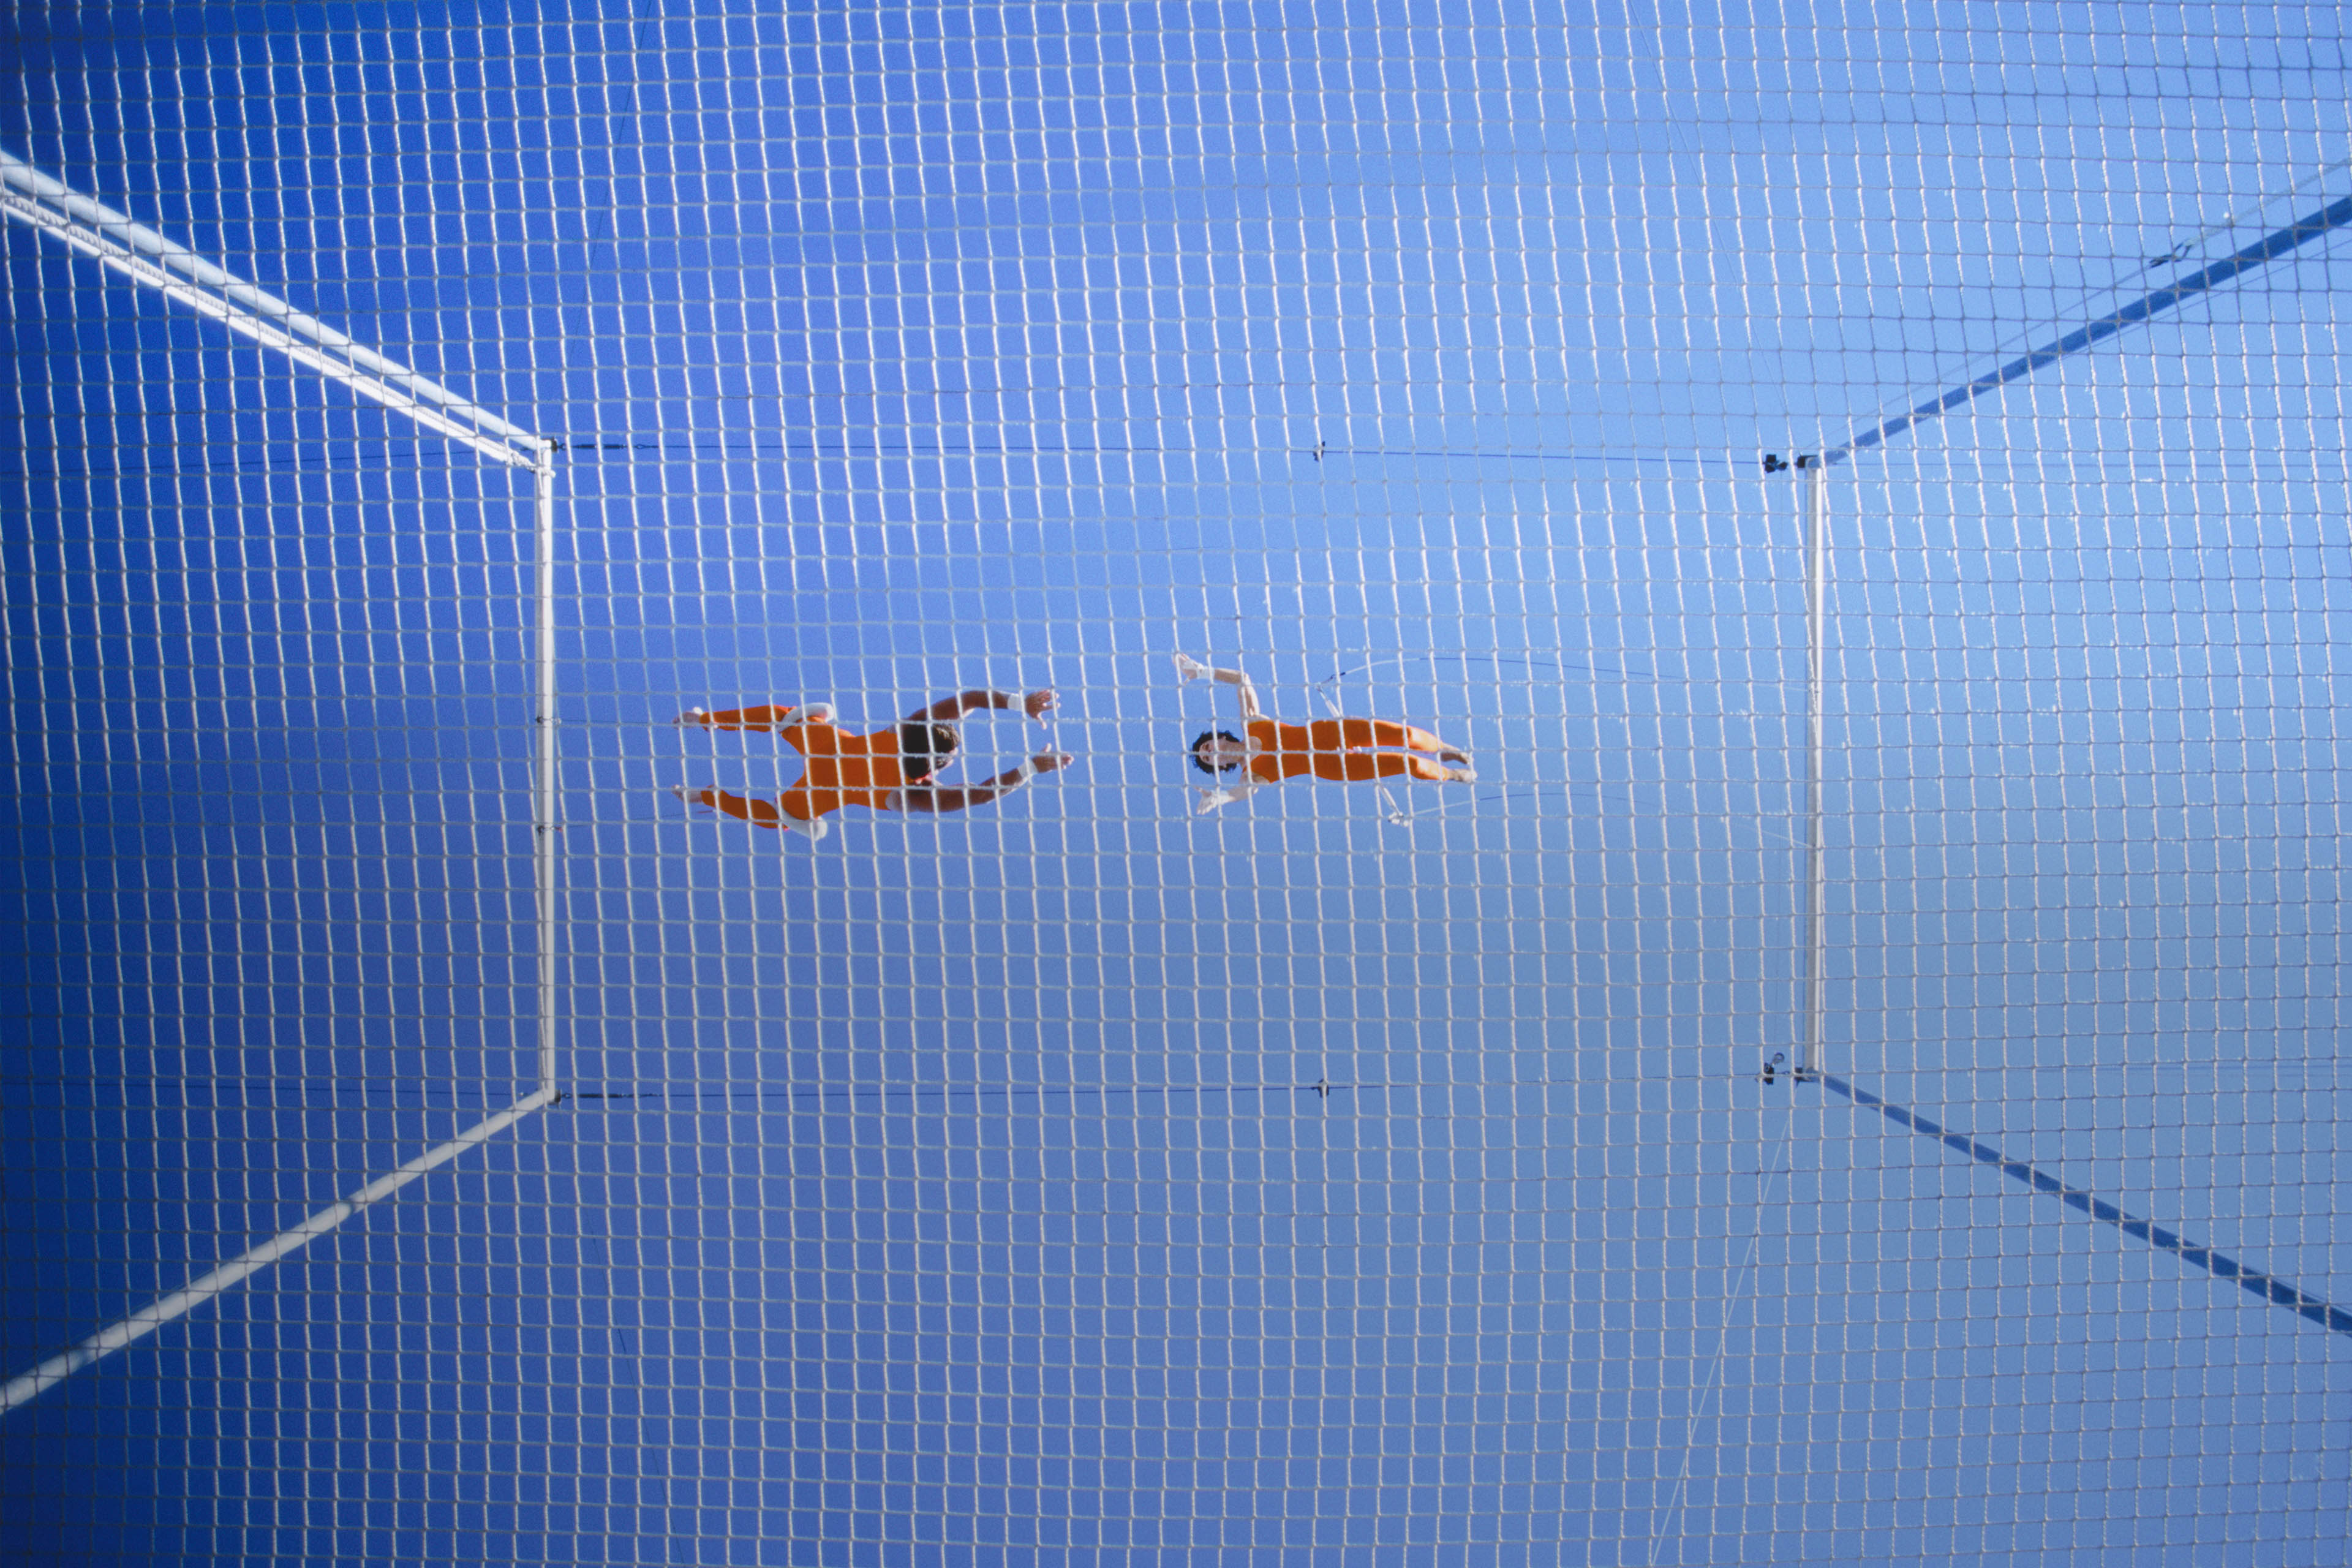 Two trapeze artists performing release move